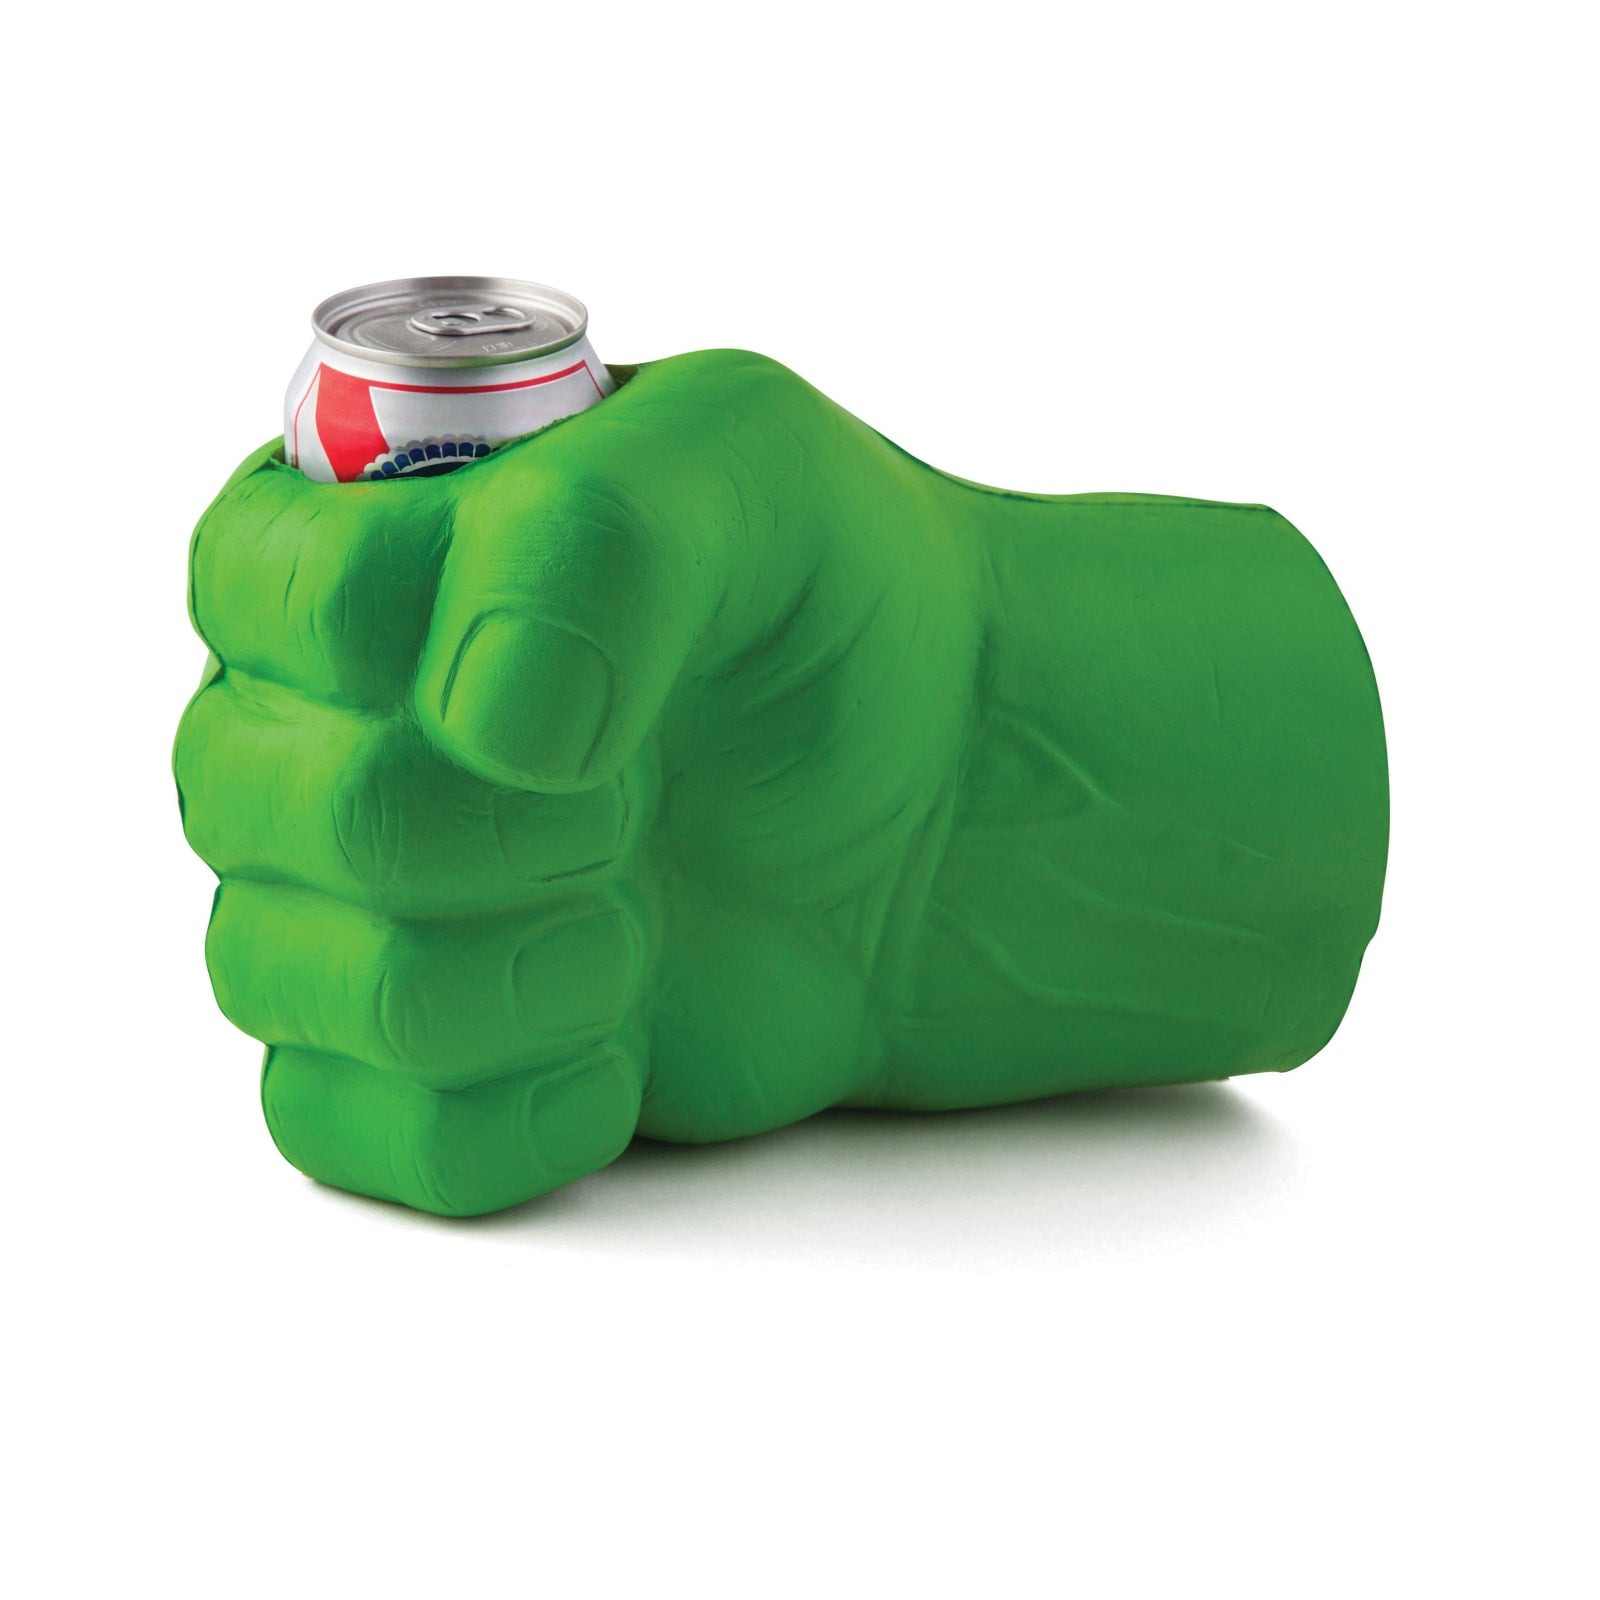 Giant Fist Drink Cozy